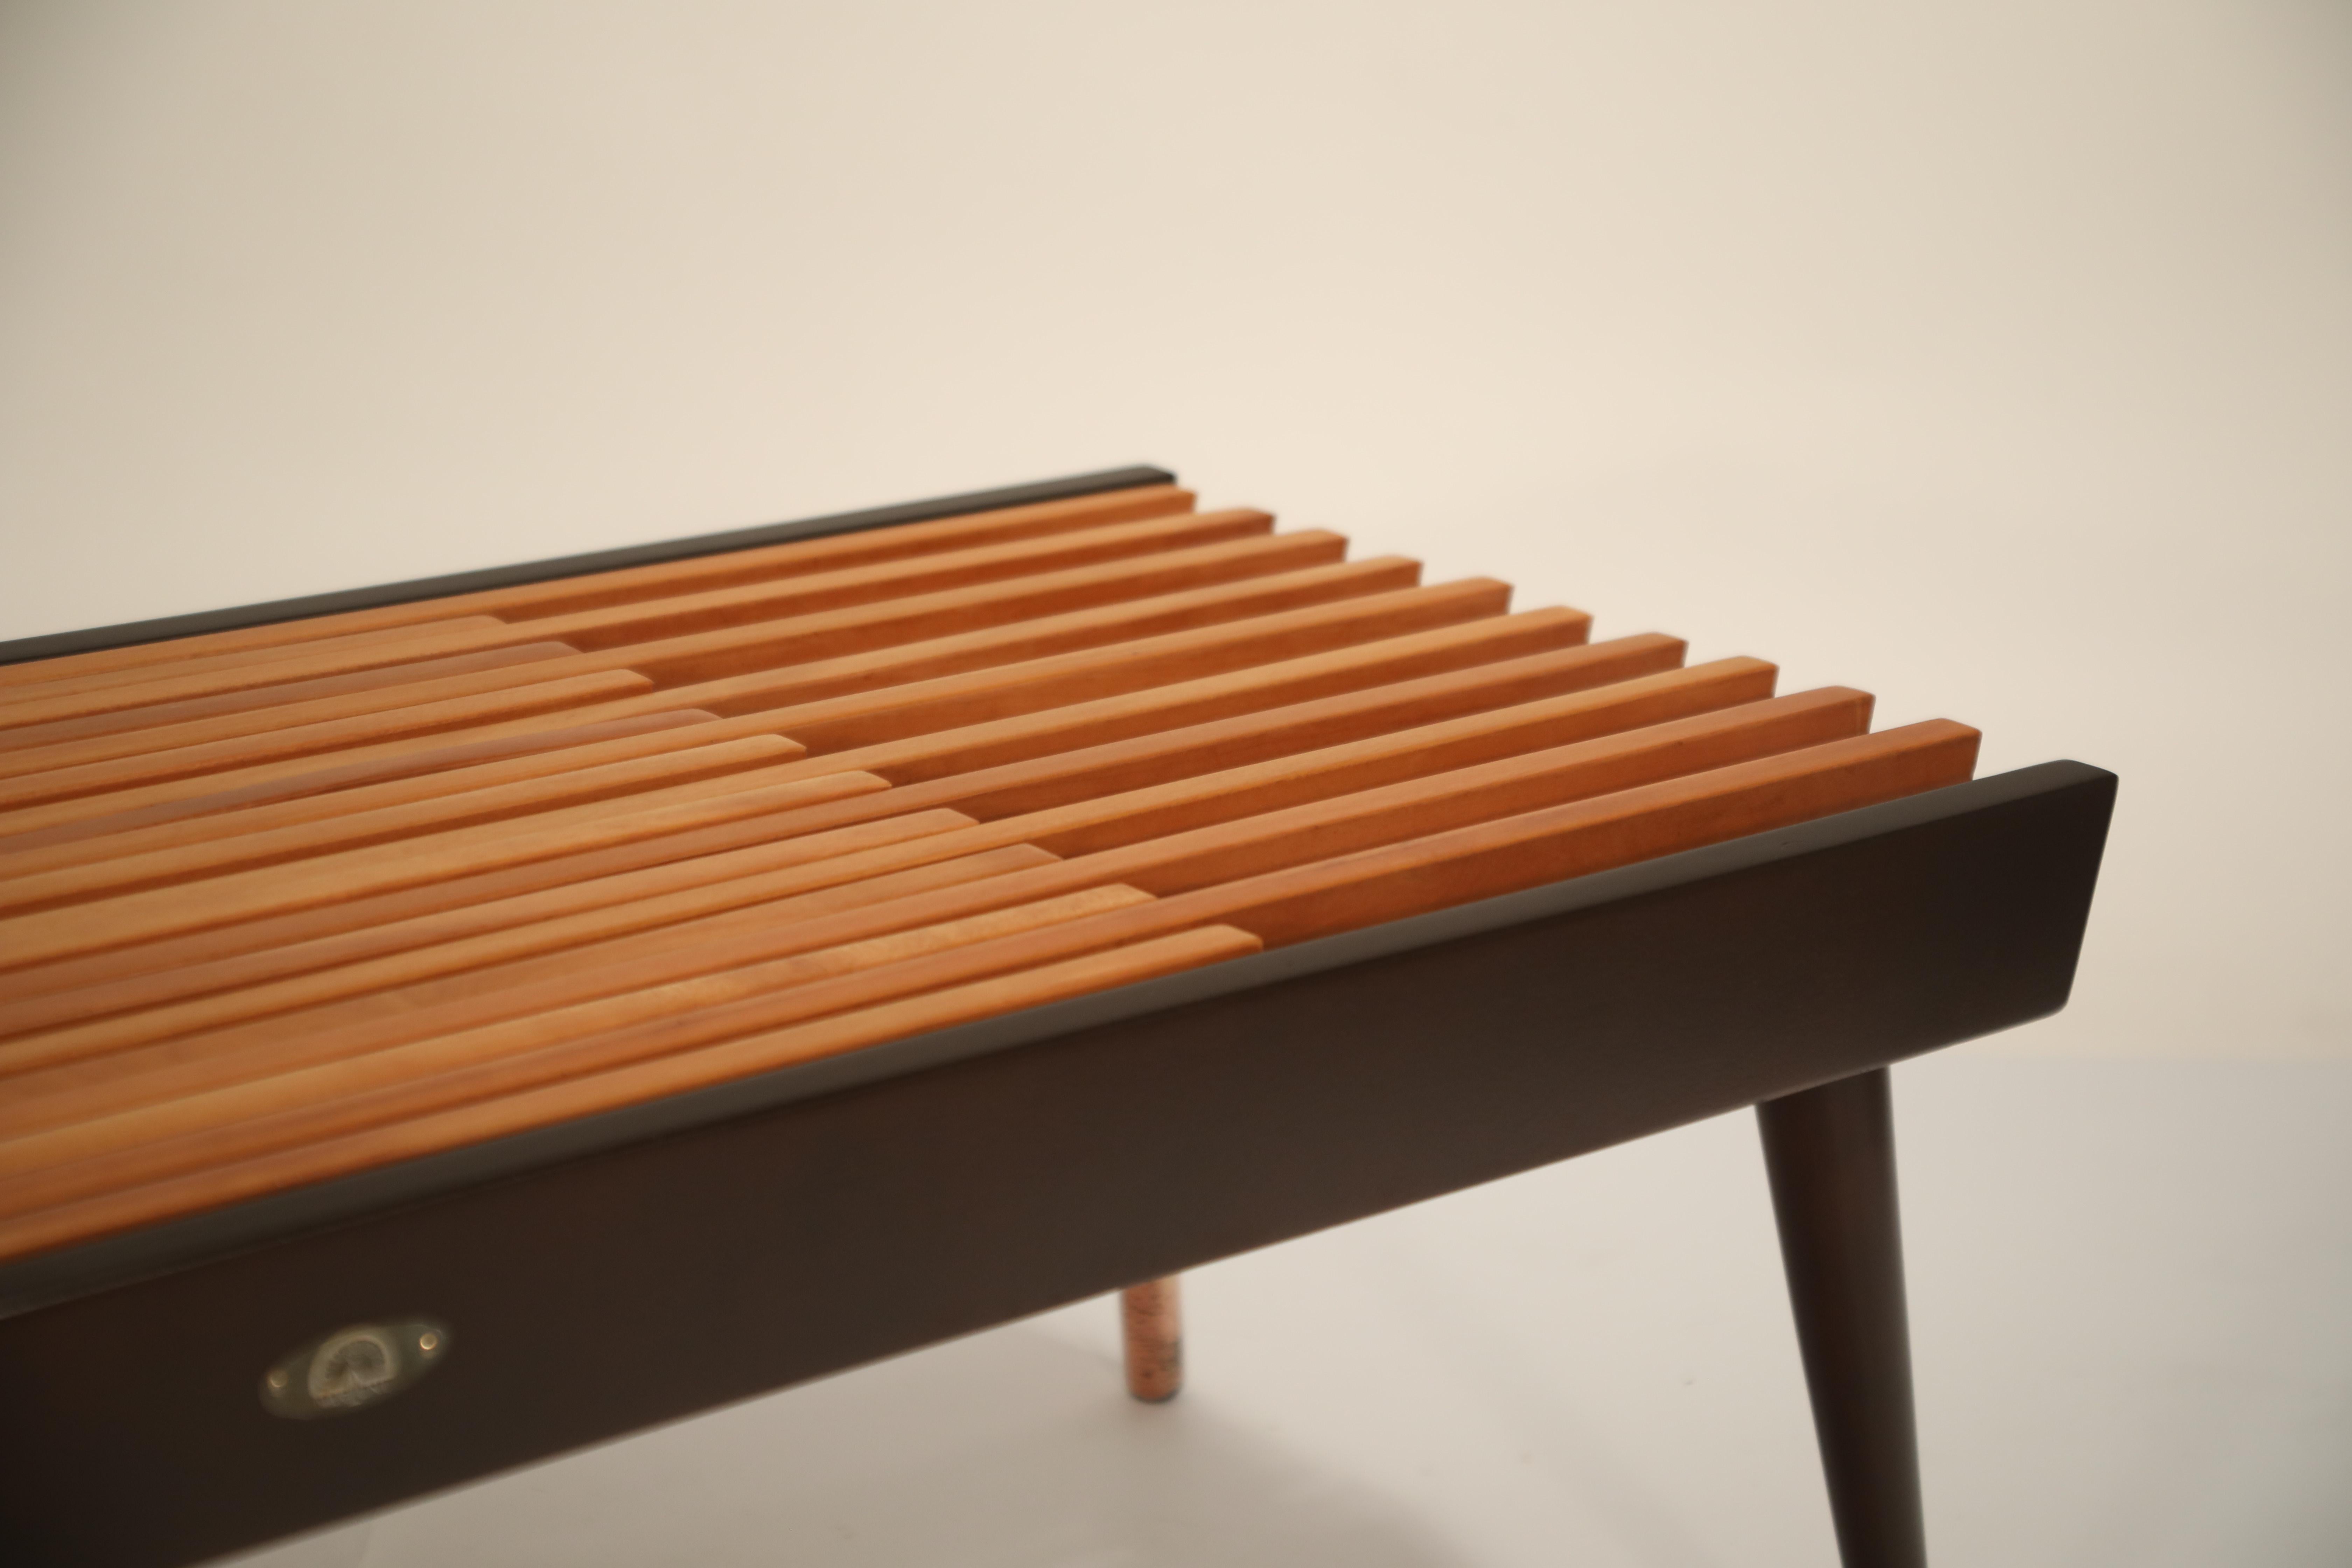 Extendable Slatted Wood Bench or Coffee Table by Maruni, 1950s Hiroshima Japan 9